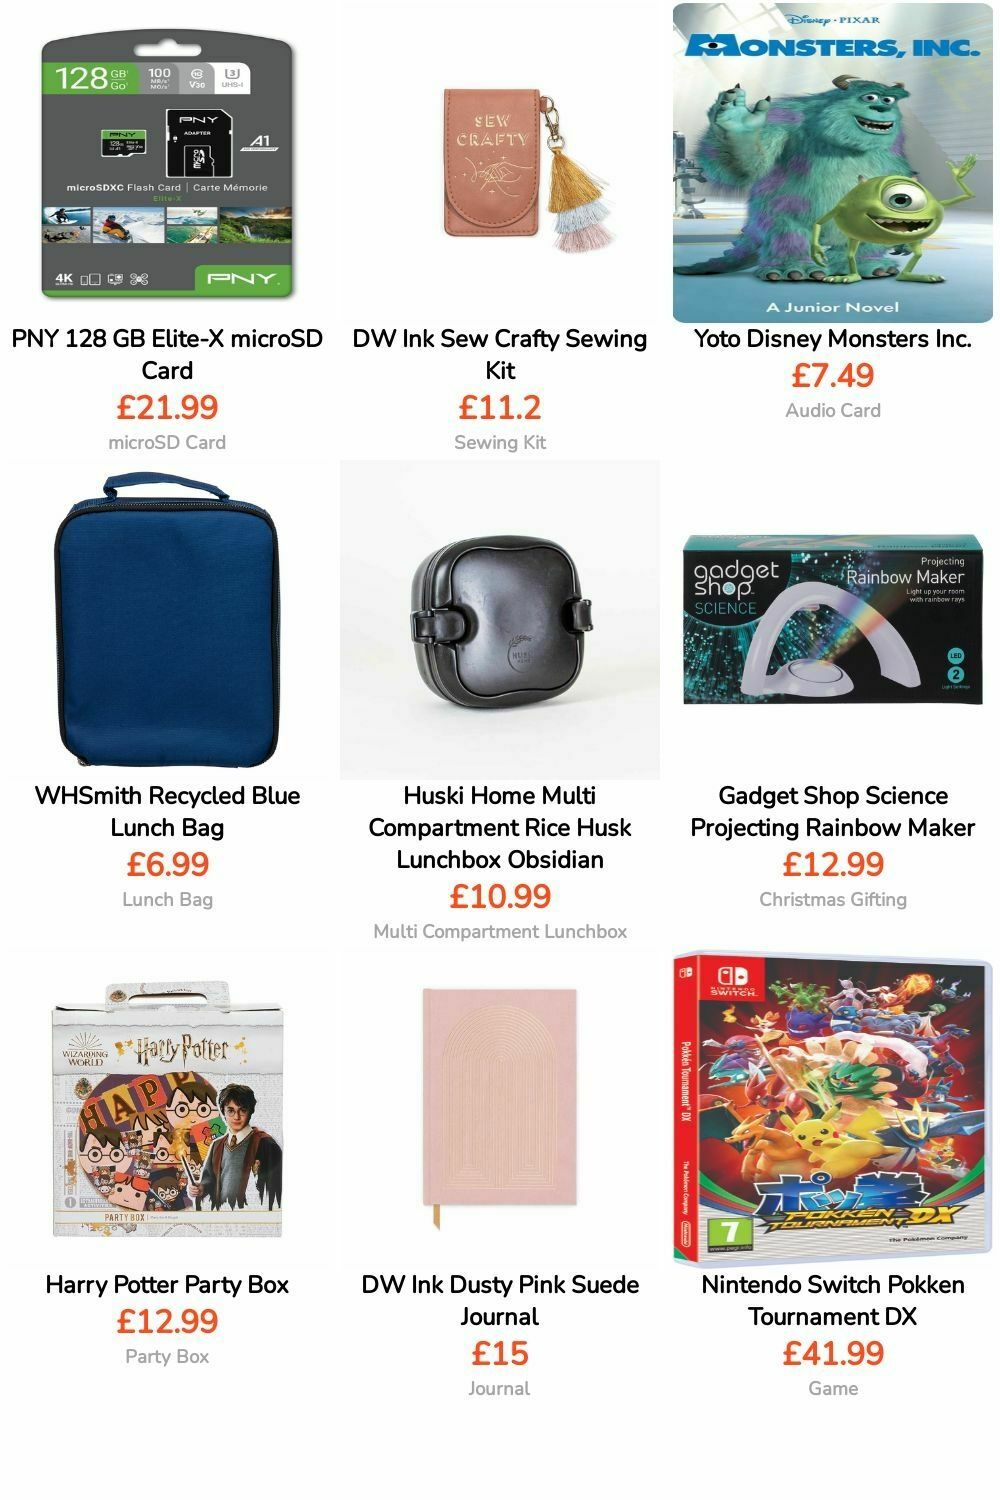 WHSmith Offers from 22 August